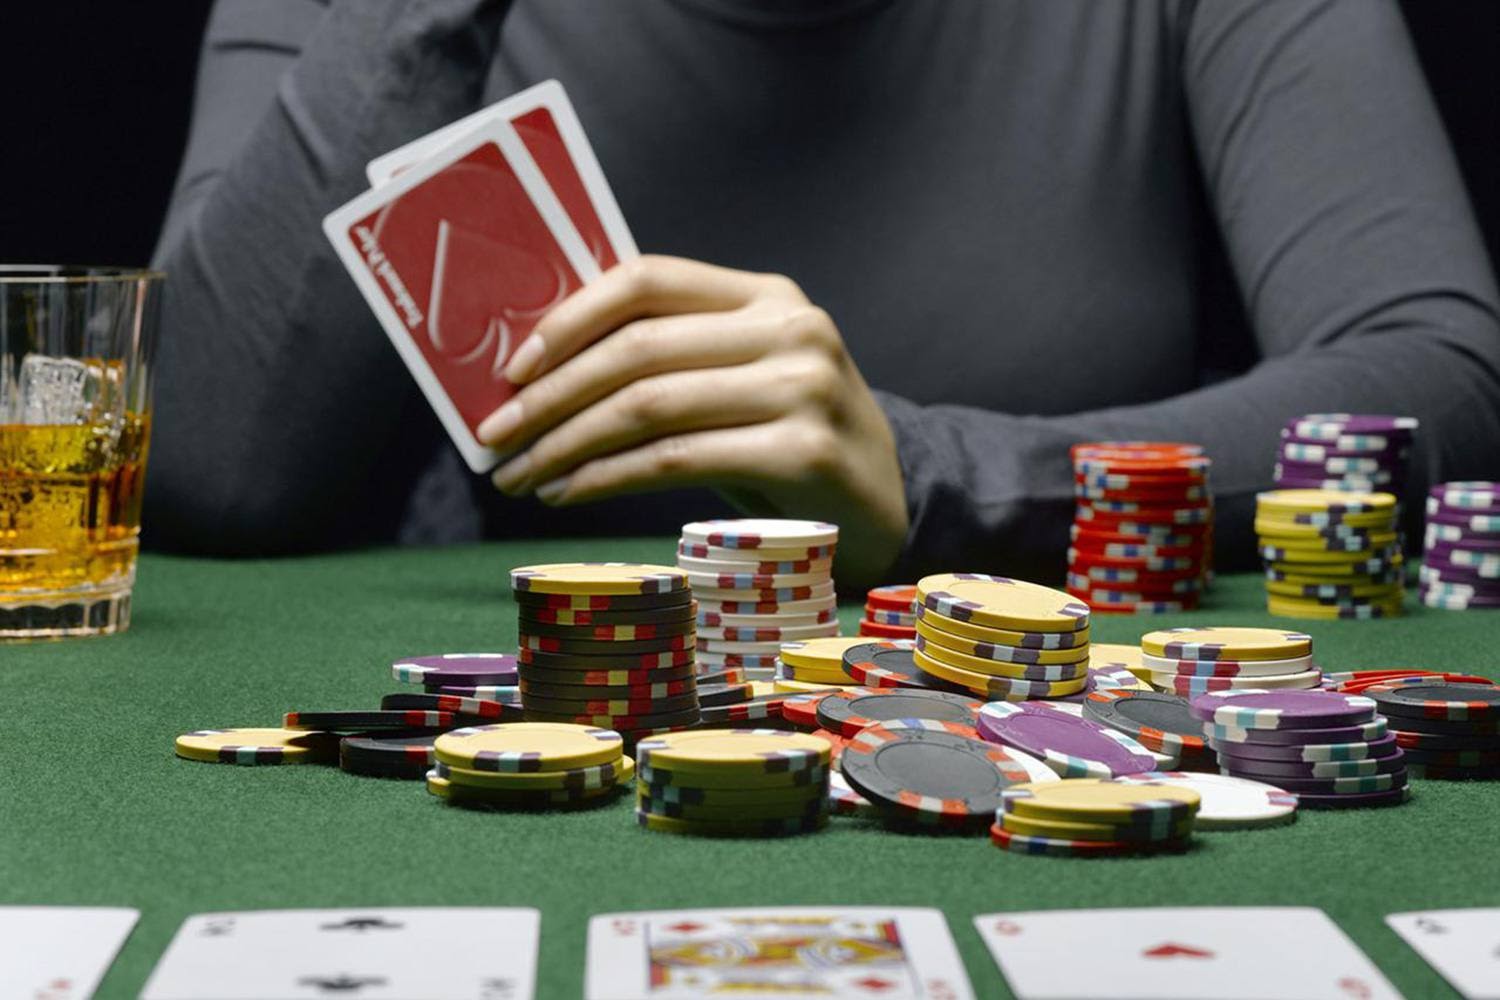 Overview of the most played online casino game, Blackjack